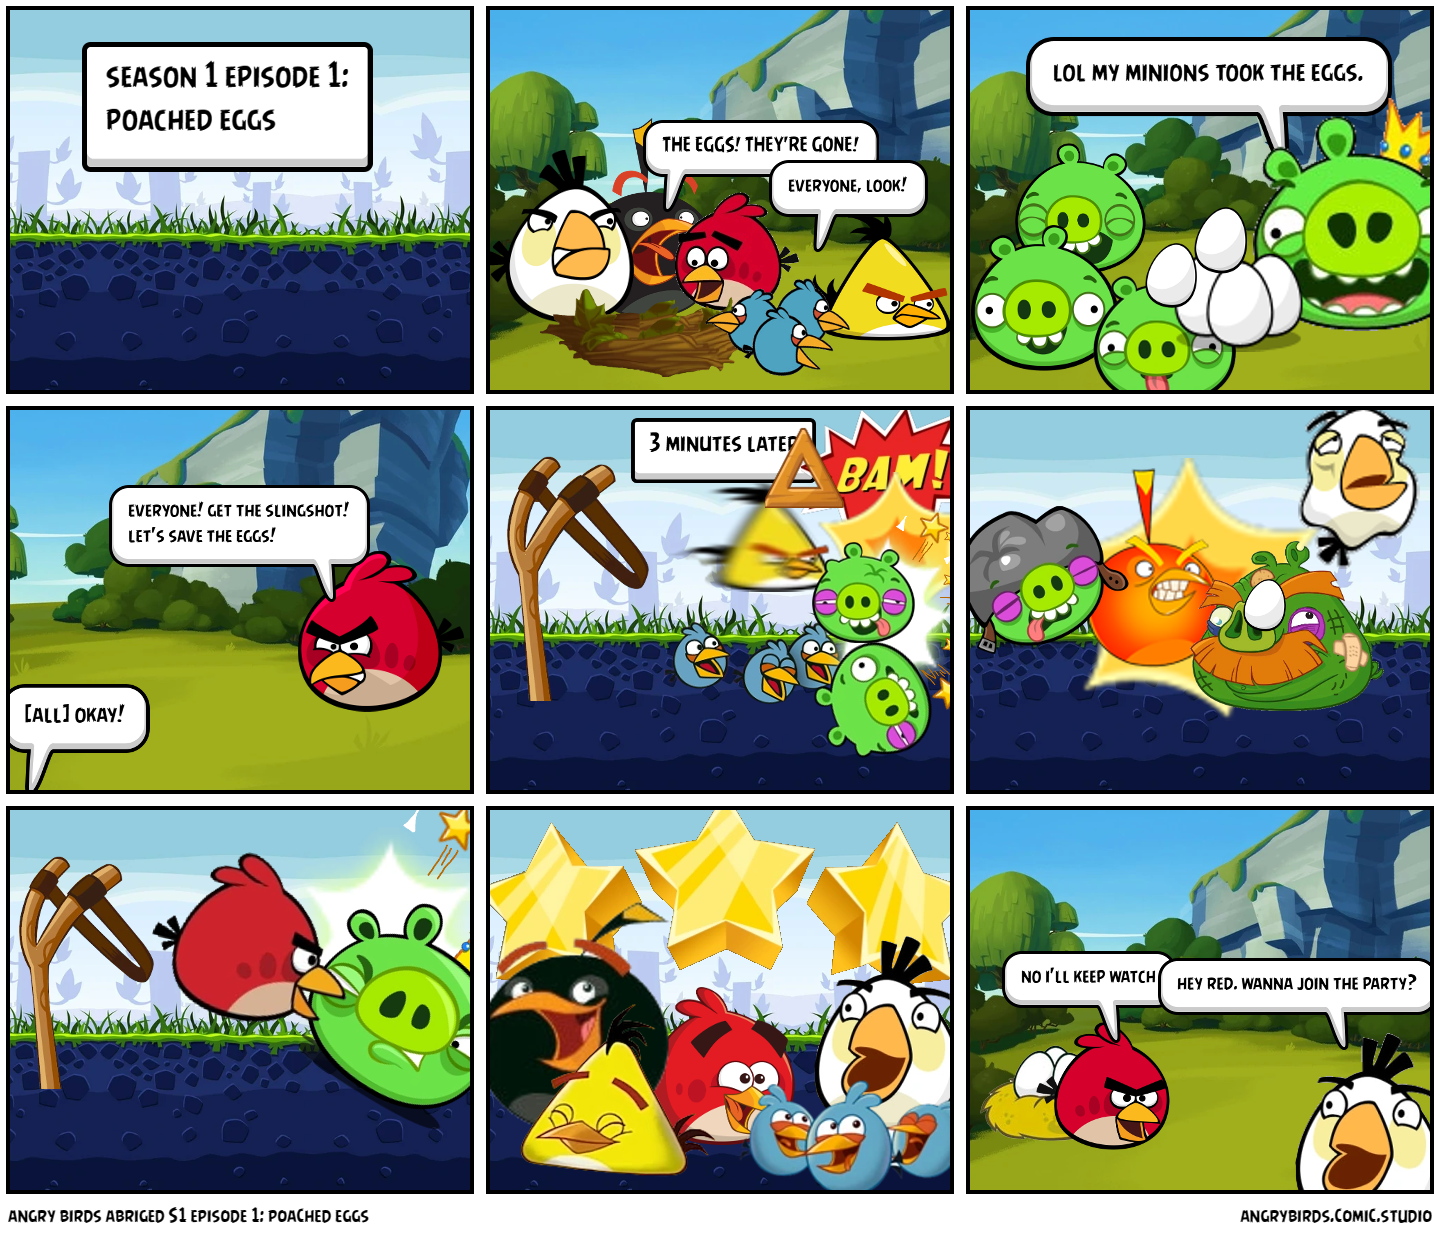 angry birds abriged S1 episode 1: poached eggs